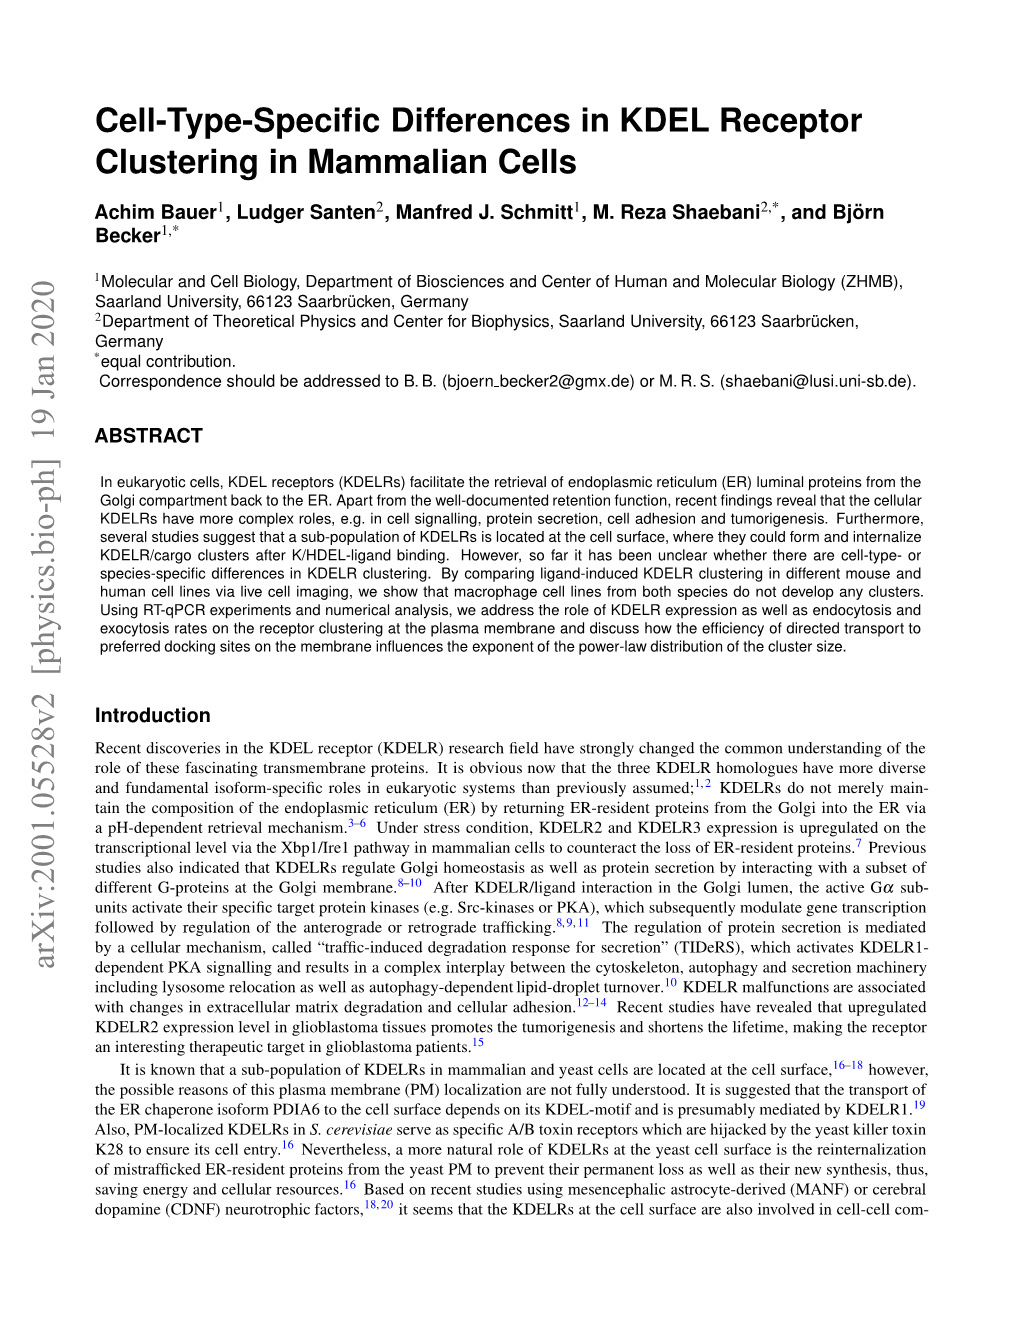 Cell-Type-Specific Differences in KDEL Receptor Clustering in Mammalian Cells